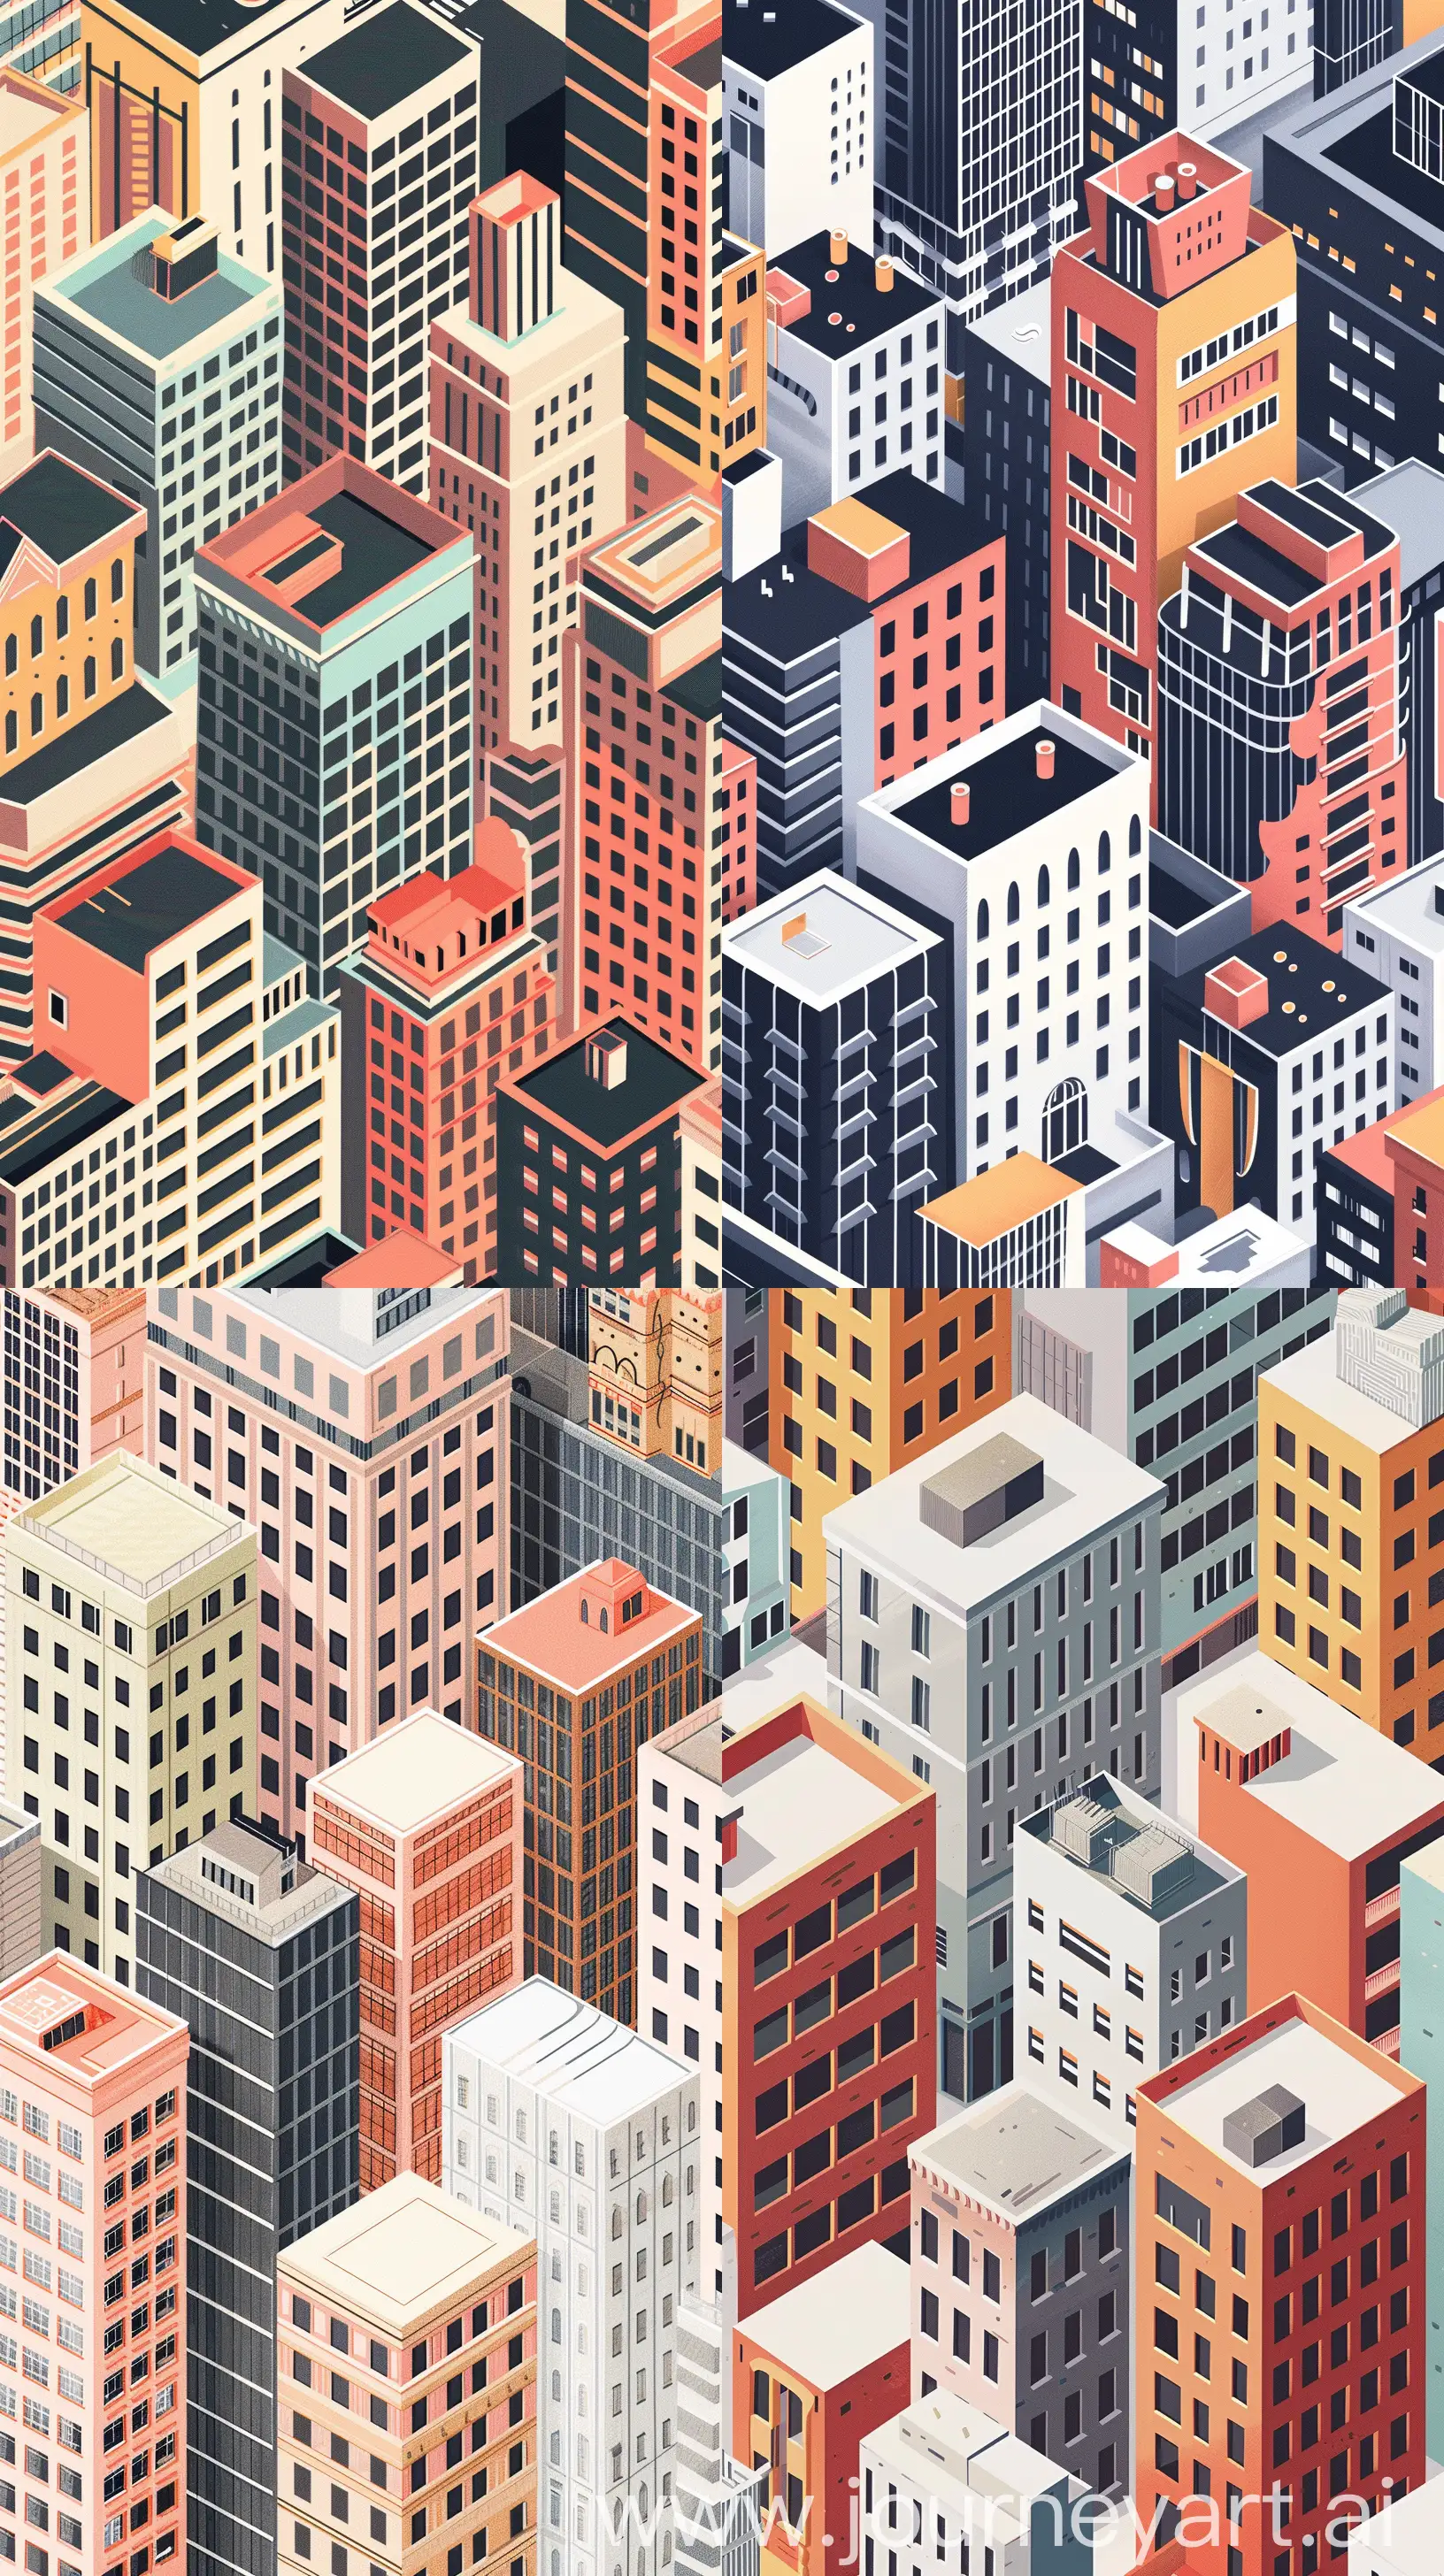 Conceive a phone wallpaper that mirrors Natalie du Pasquier's exploration of architectural elements, showcasing a minimalist, isometric cityscape. Use clean lines and contrasting colors to depict a series of buildings, each with its own unique pattern and texture. The composition should evoke a sense of order and playfulness, reflecting du Pasquier's ability to blend the structural with the whimsical. --ar 9:16